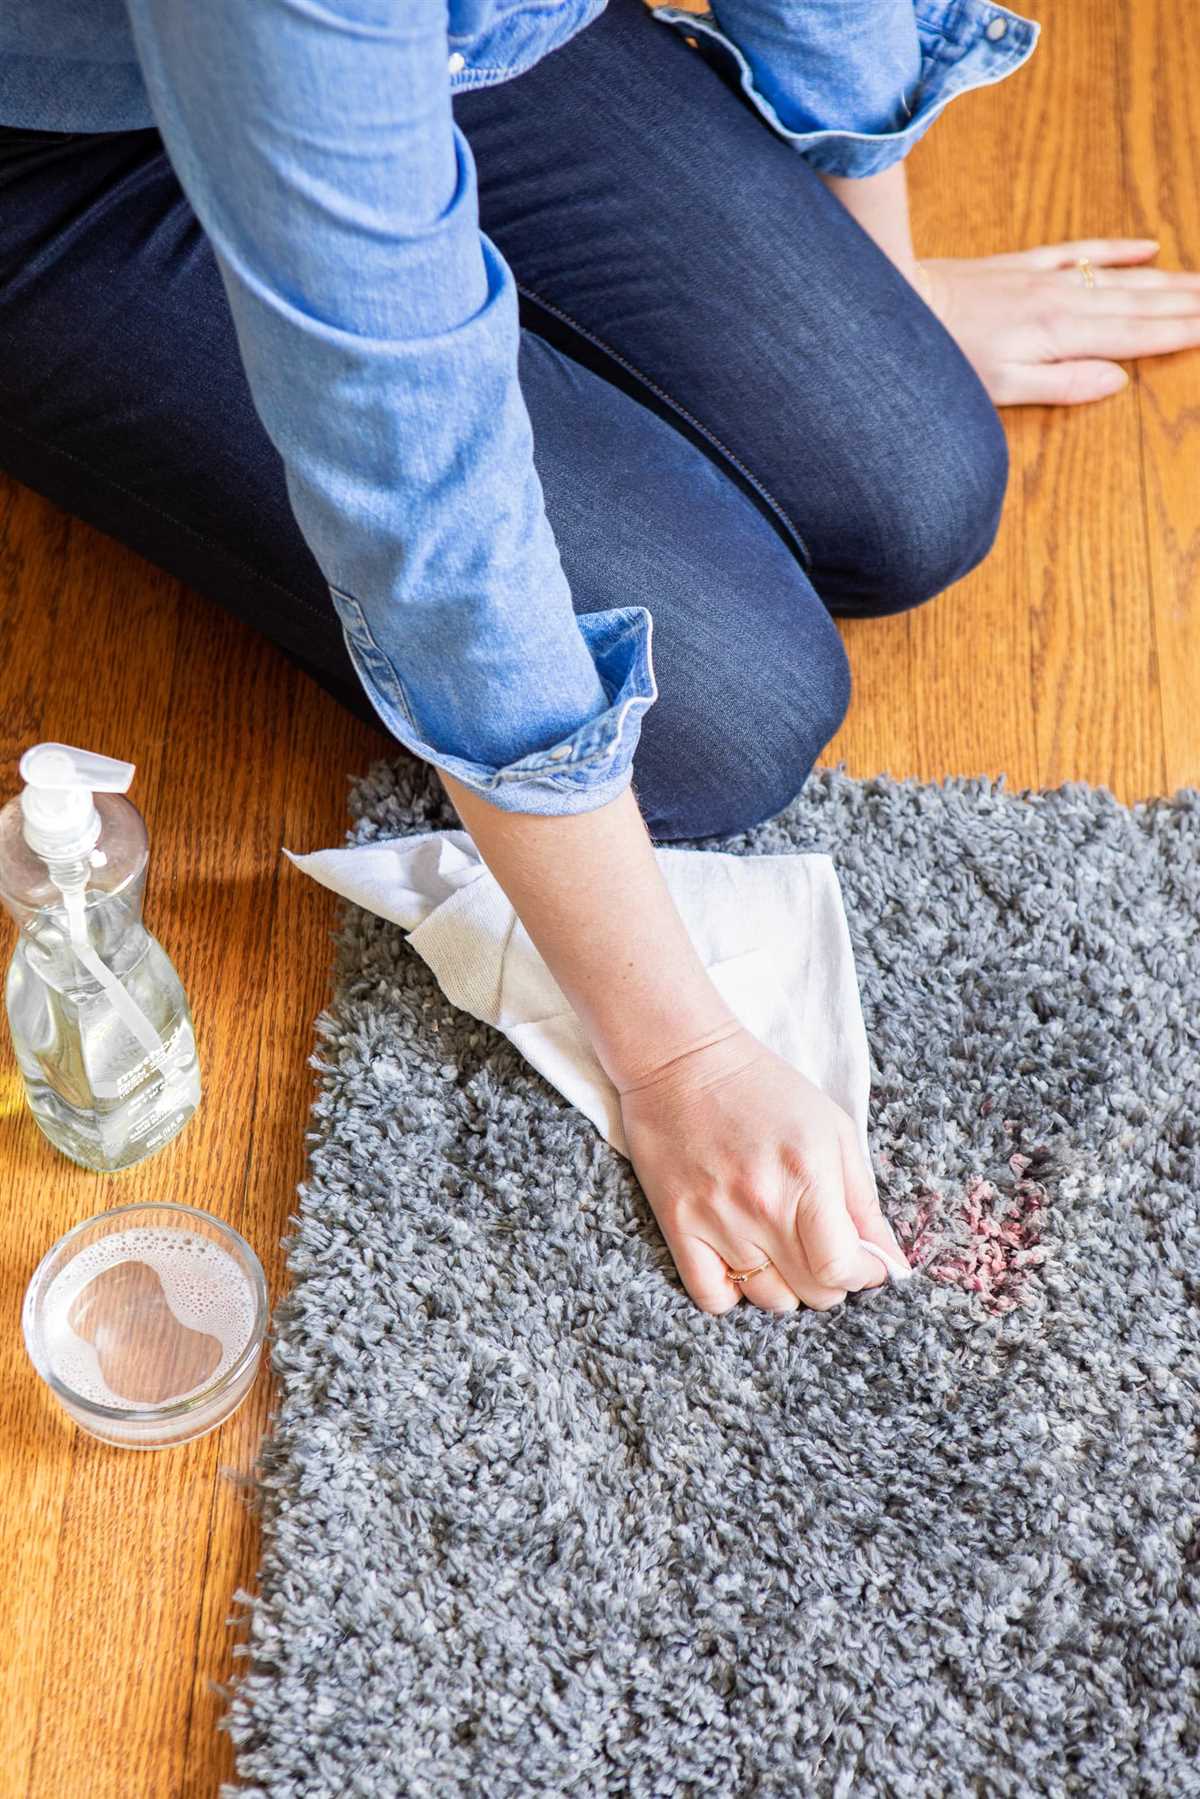 Understanding the Impact of Candle Wax on Carpets